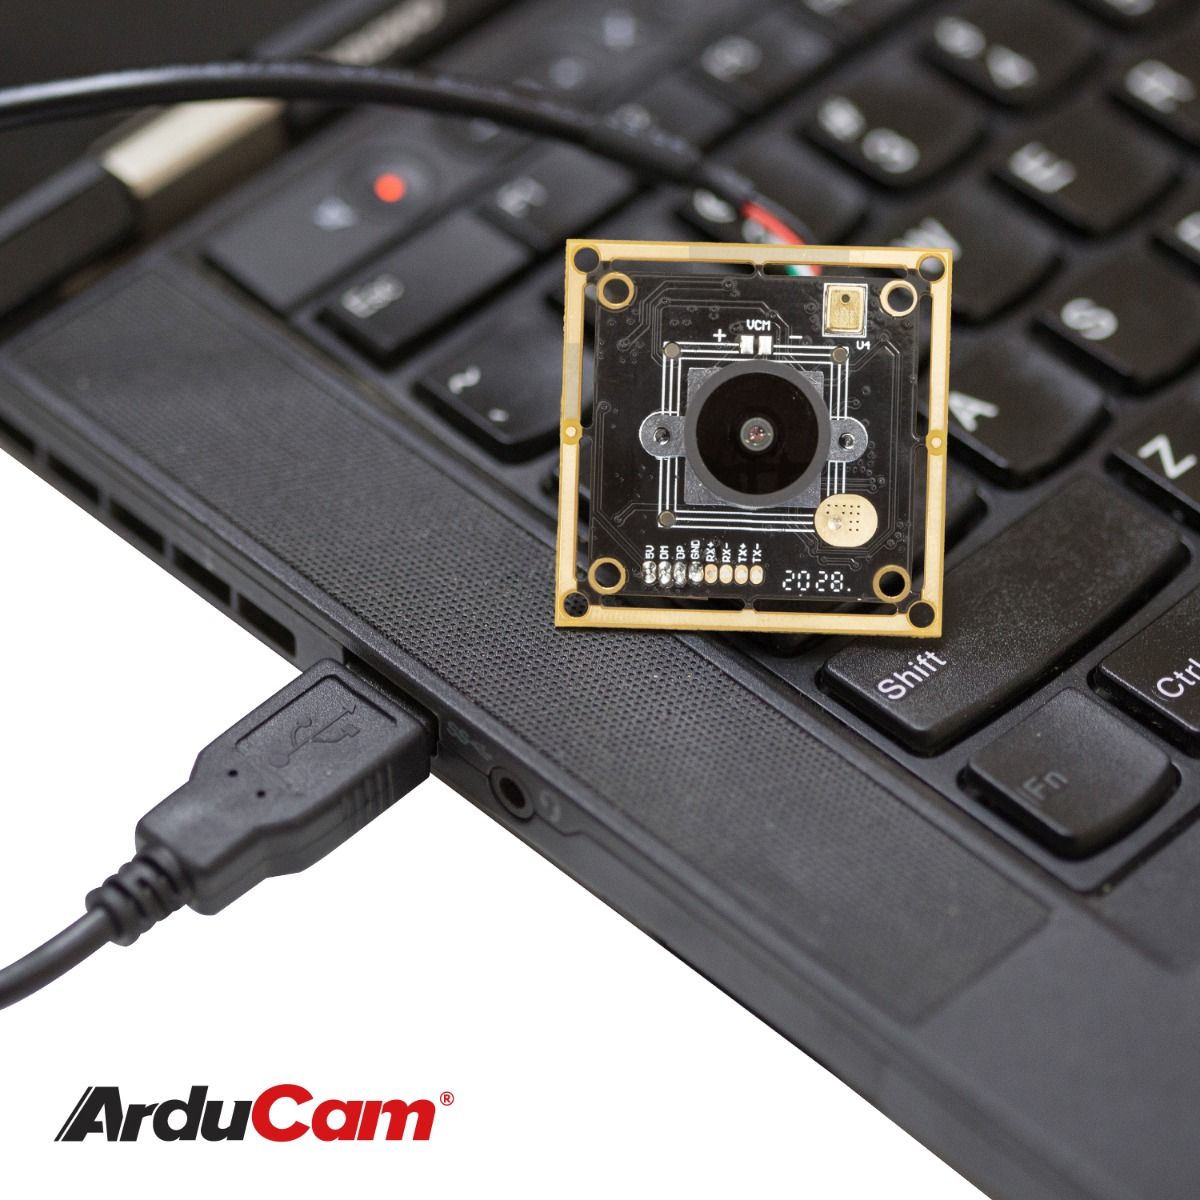 Arducam 8MP 1080P USB Camera Module with M12 Mount, 1/3.2″ CMOS IMX179 UVC USB2.0 Webcam Board with 3.3ft/1m Cable for Windows, Linux, Android and Mac OS